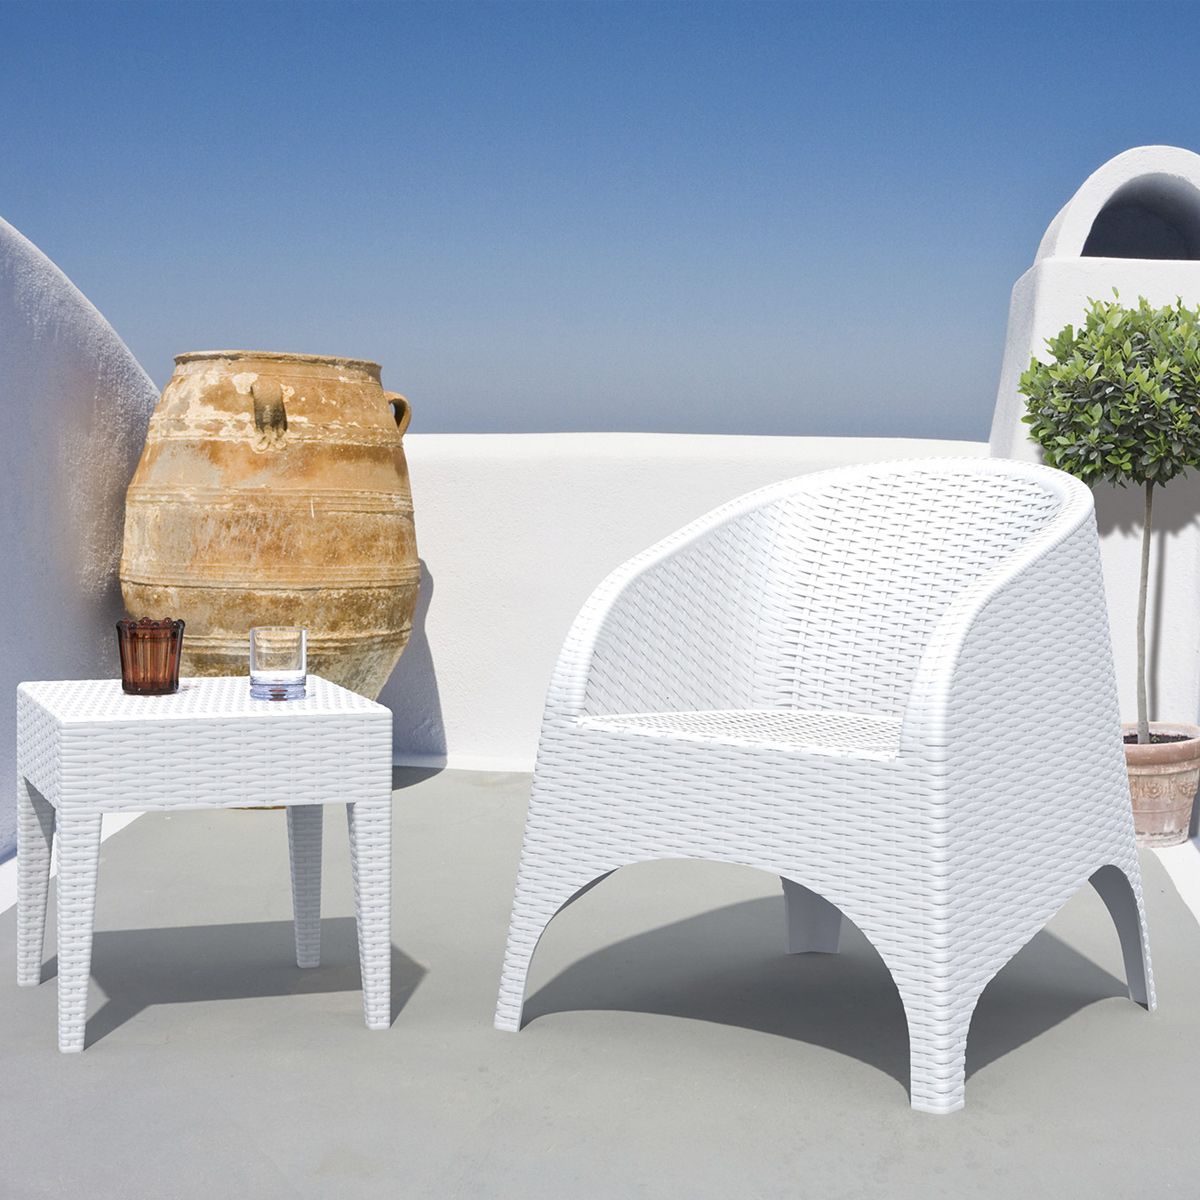 Resin Outdoor Tables Throughout Most Popular Neo Horeca Furniture Neo Horeca Furniture – Neo Horeca Furniture – Neo  Horeca Furniture (View 14 of 15)